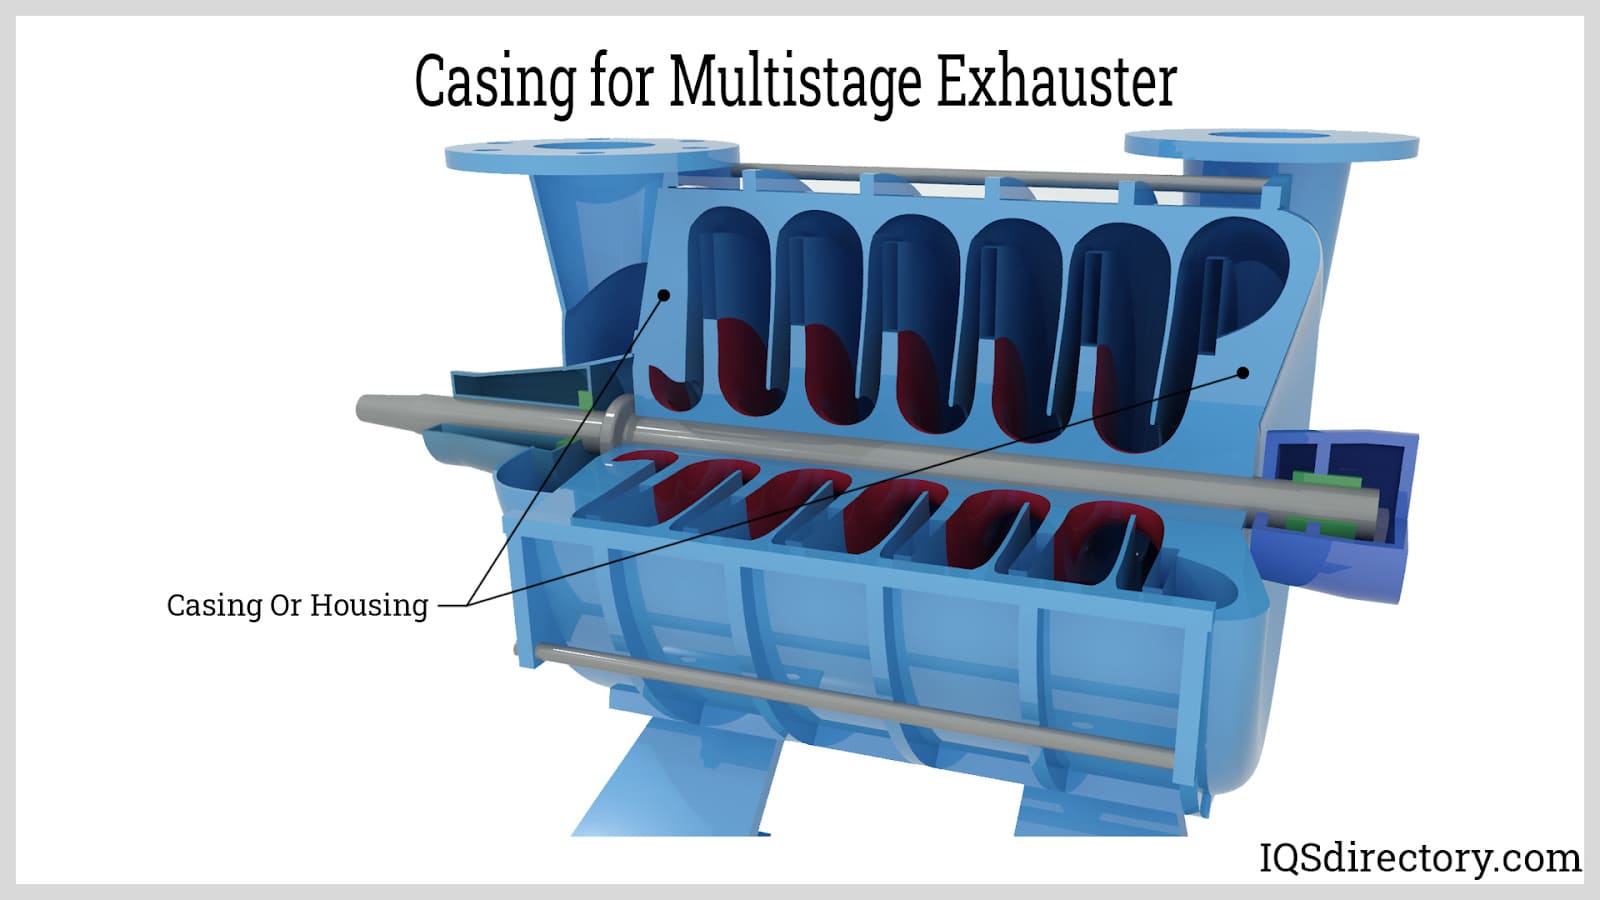 Casing for Multistage Exhauster